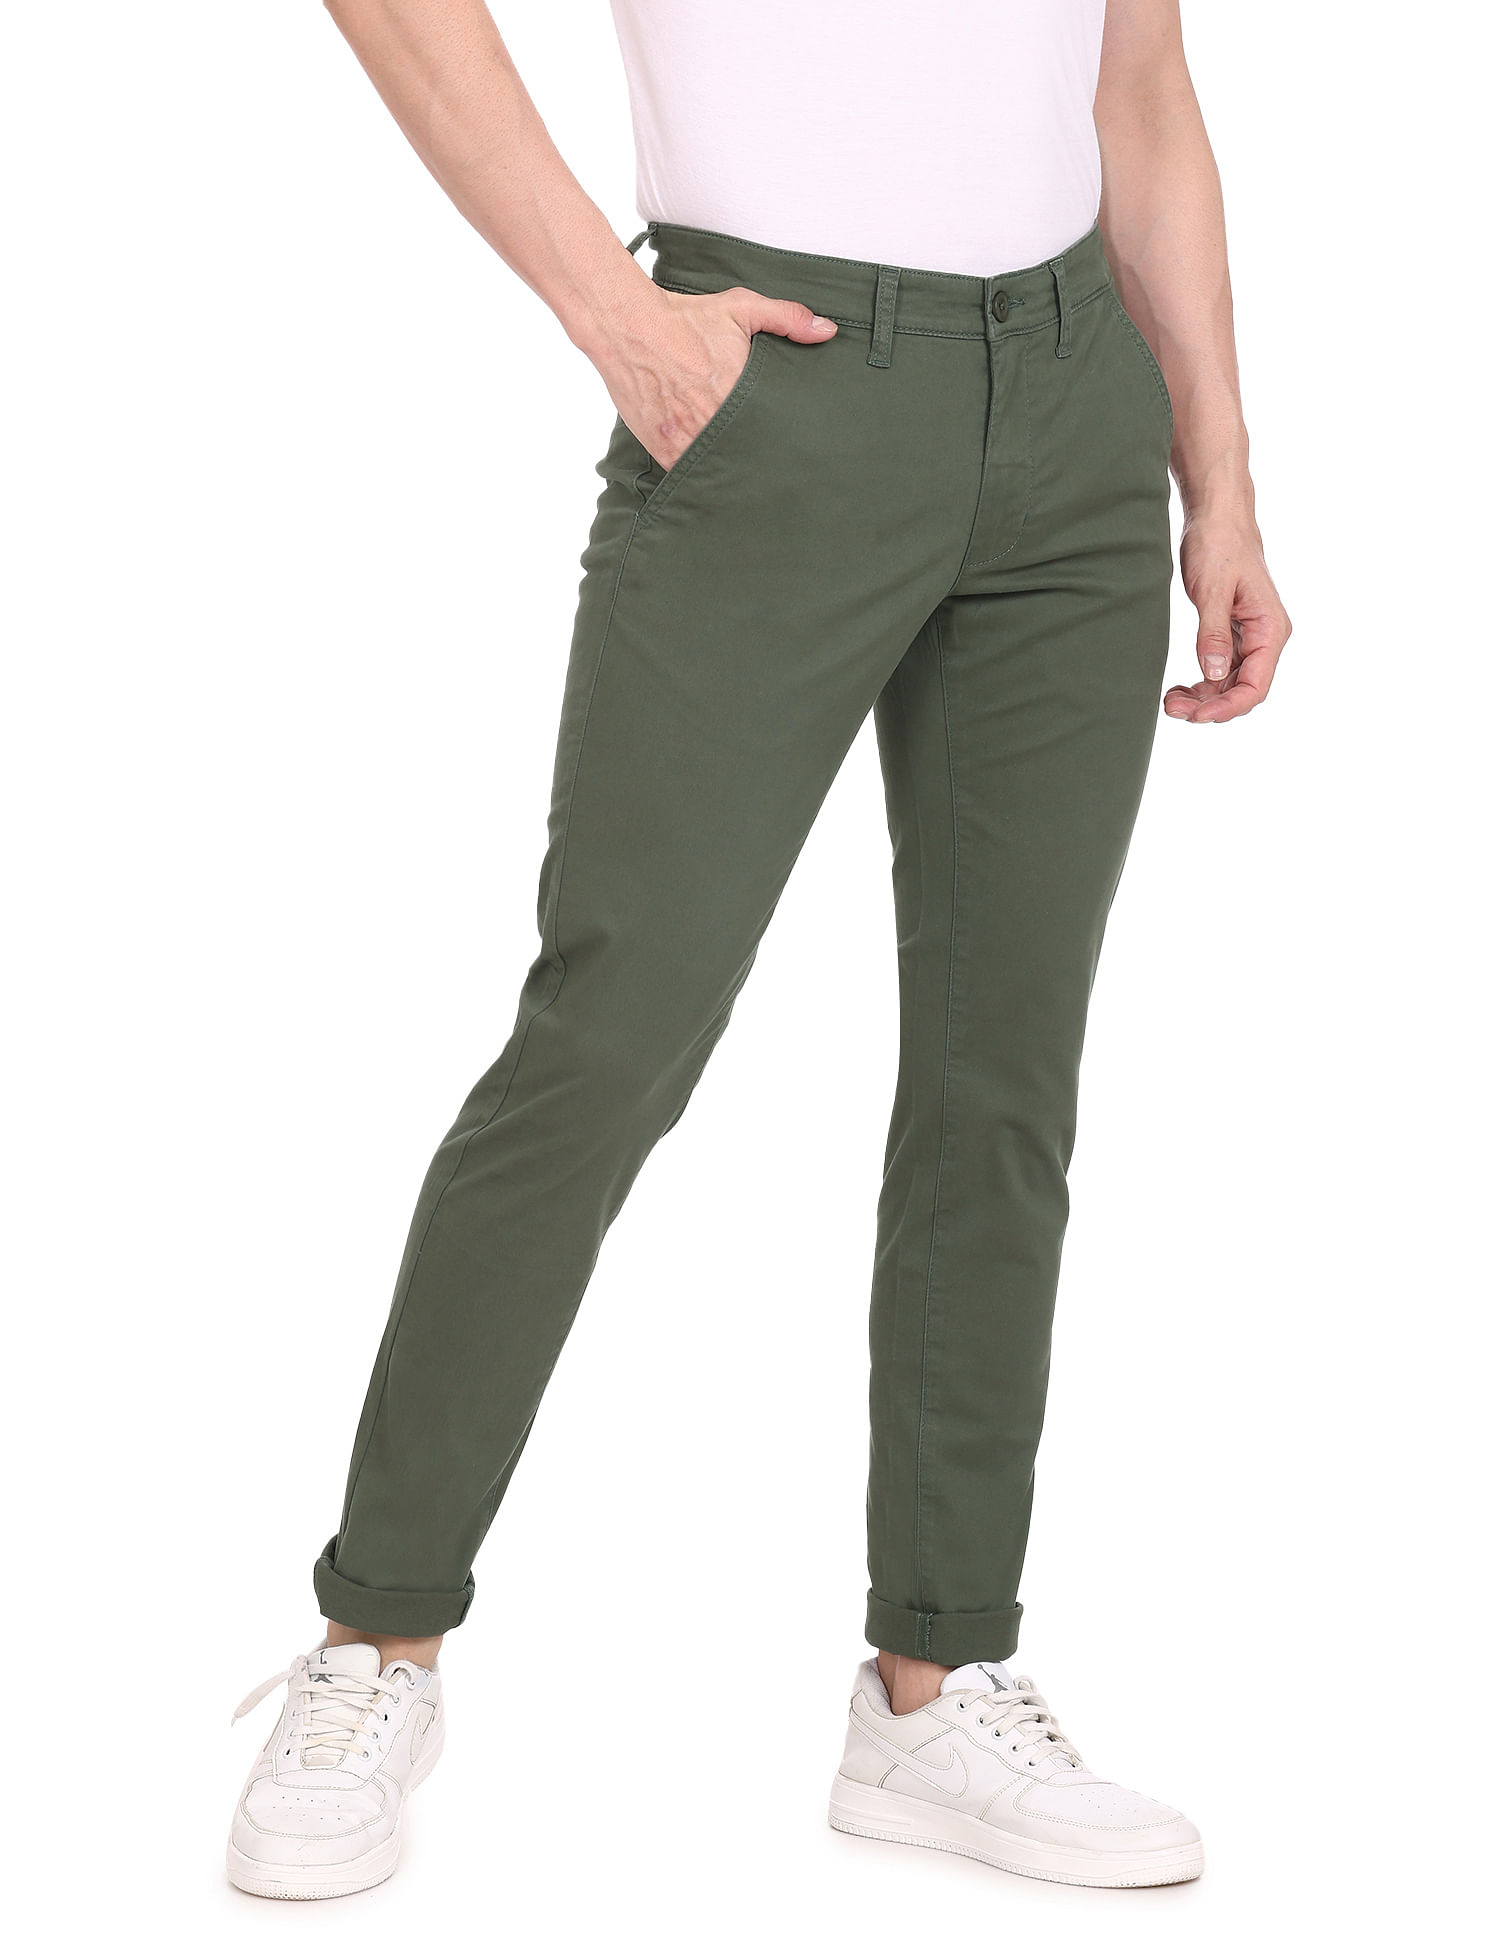 Buy Men Olive Slim Fit Solid Casual Trousers Online  766520  Allen Solly